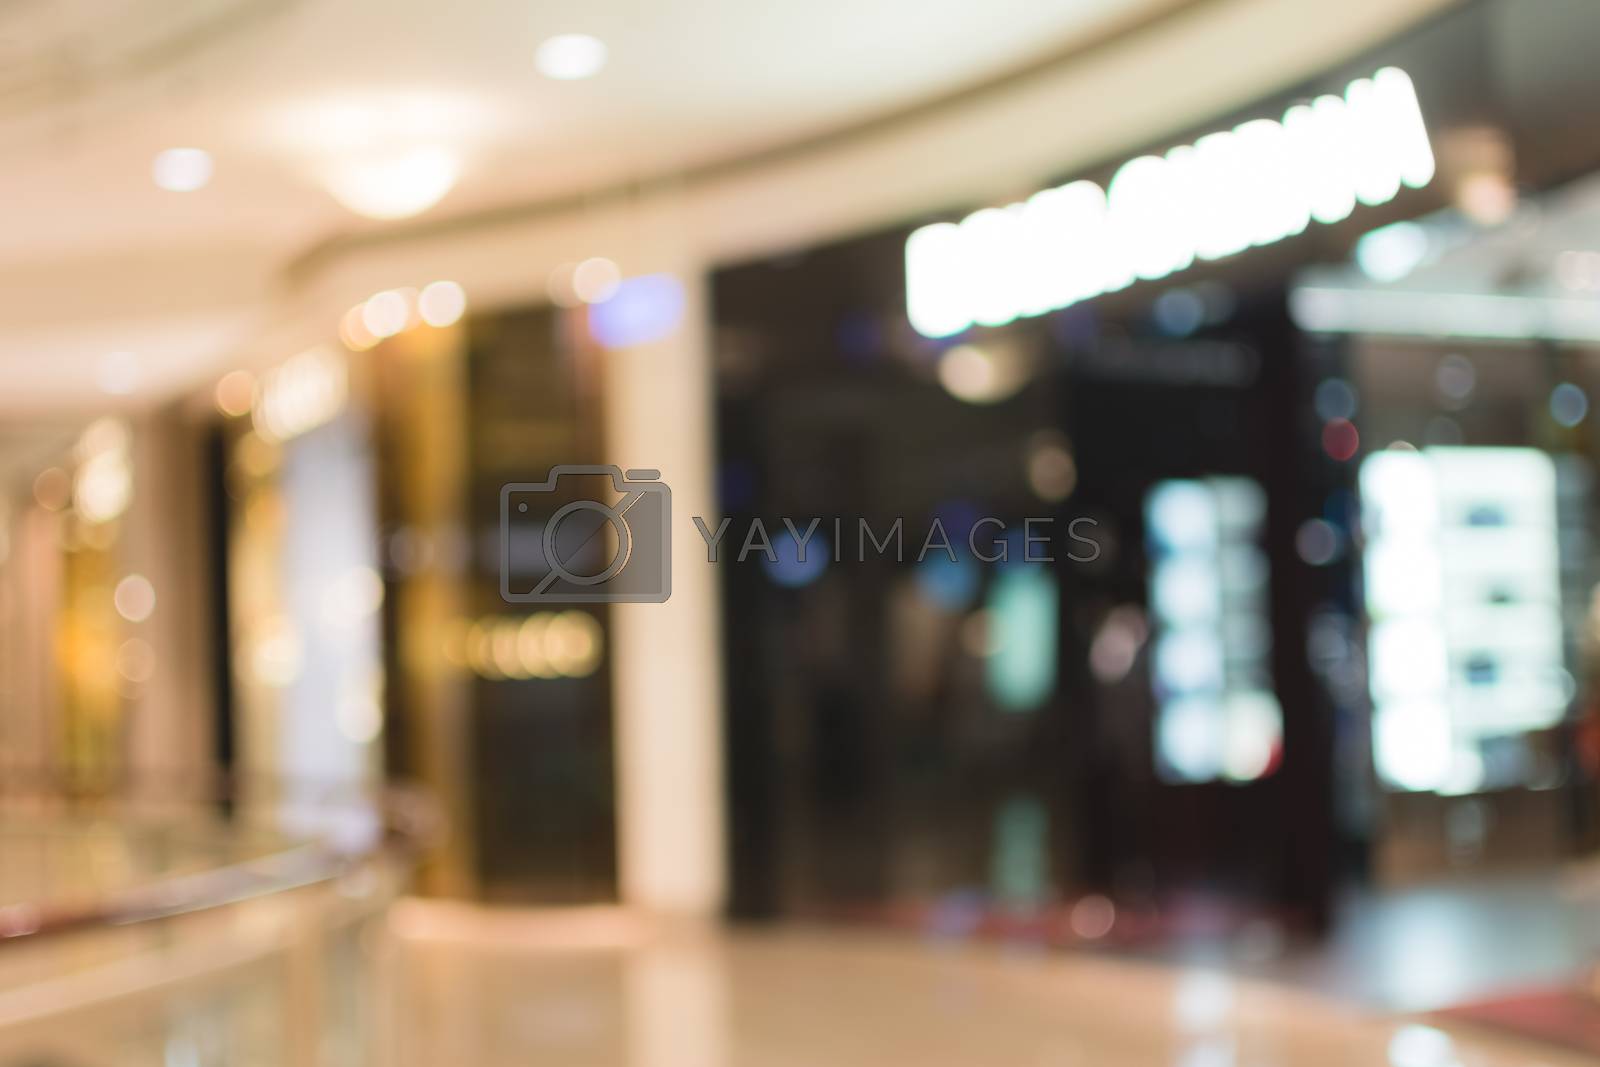 Royalty free image of Abstract background of shopping mall by elwynn